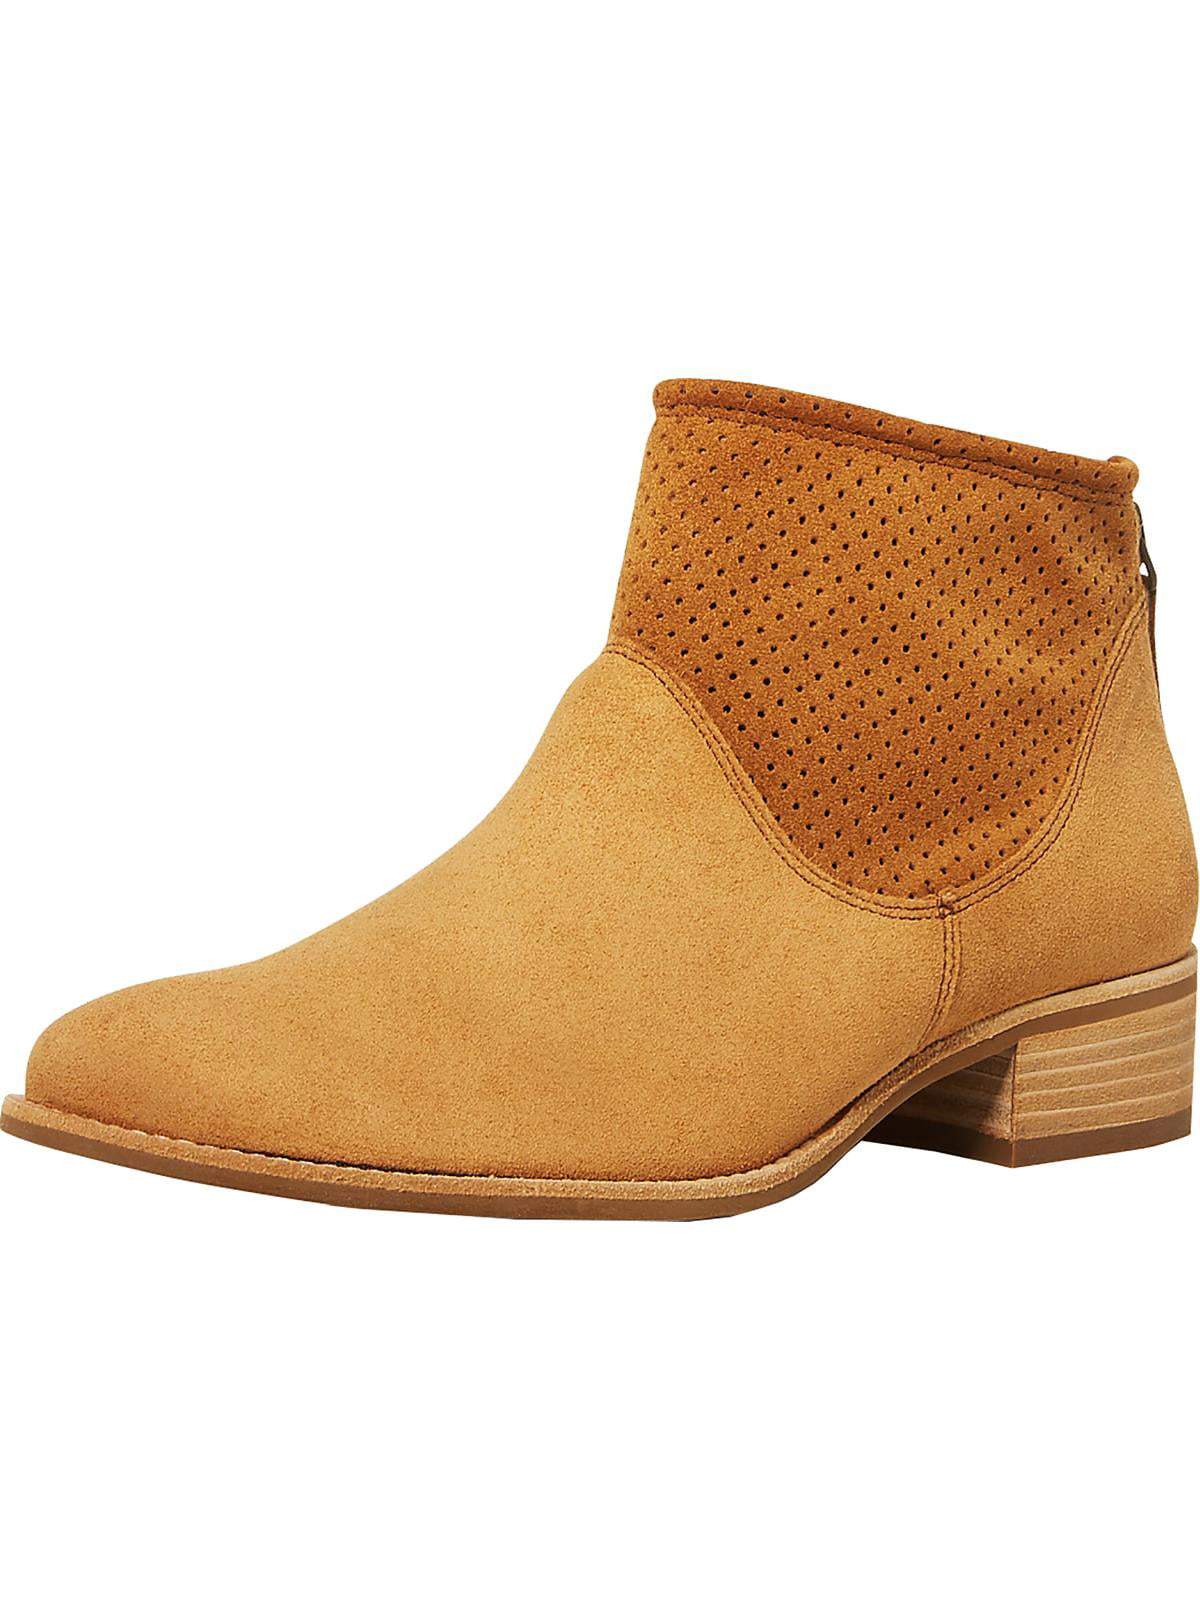 Womens Heavenly Soles Ankle Boots Simply Be 